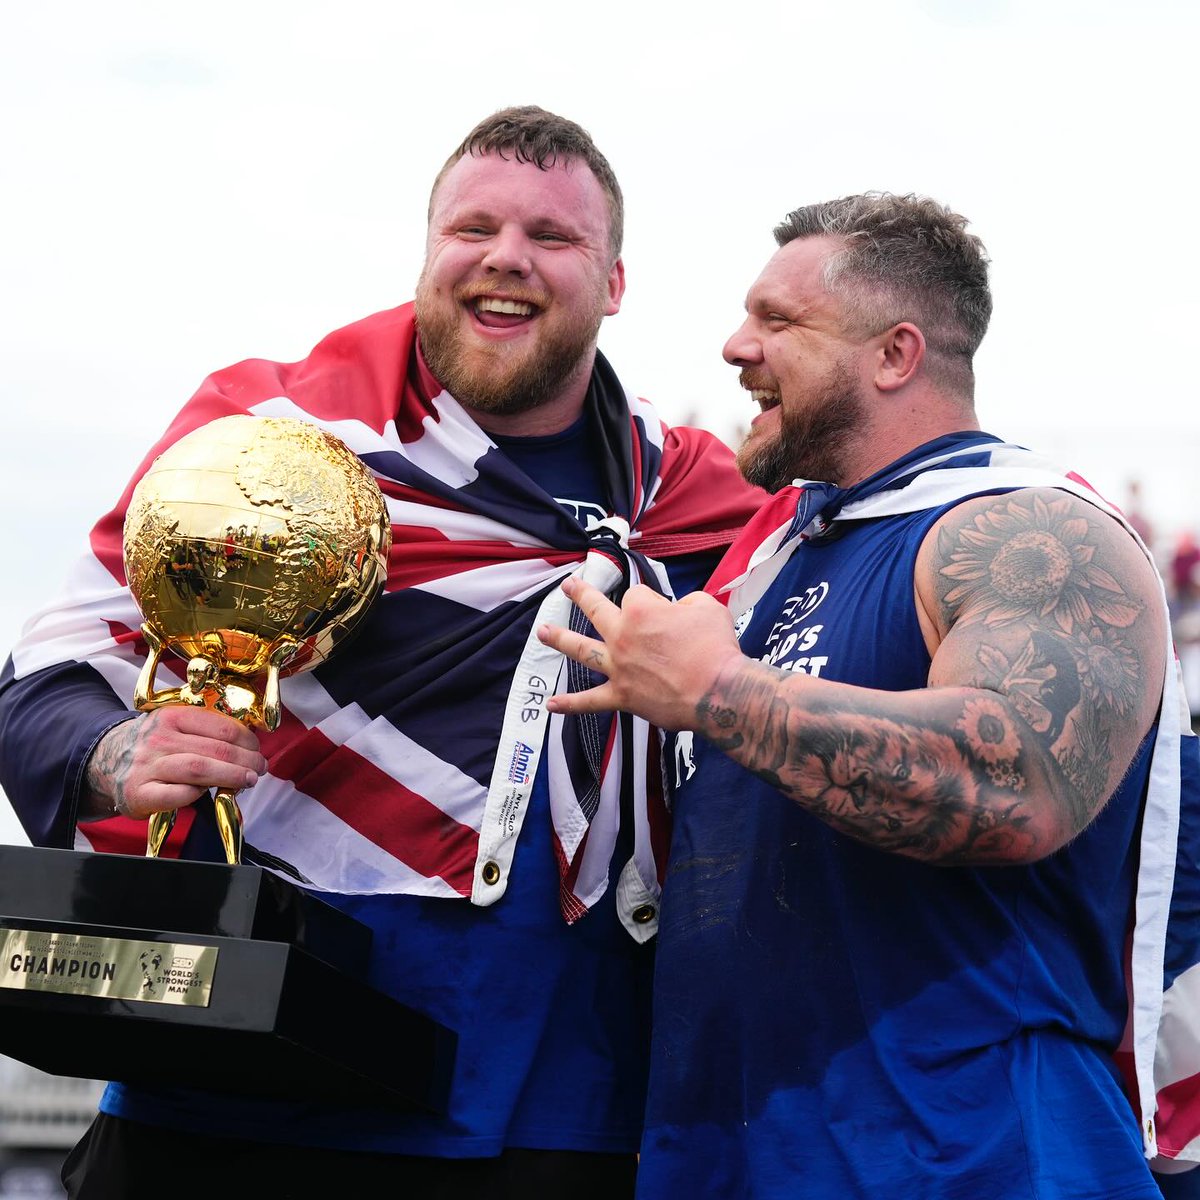 Tom Stoltman Claims Third World's Strongest Man Title 💪🏆 In the realm of strength and might, one name continues to come up: Tom Stoltman. The towering Scotsman recently clinched his third World's Strongest Man title! Read More 👉zurl.co/AzwT